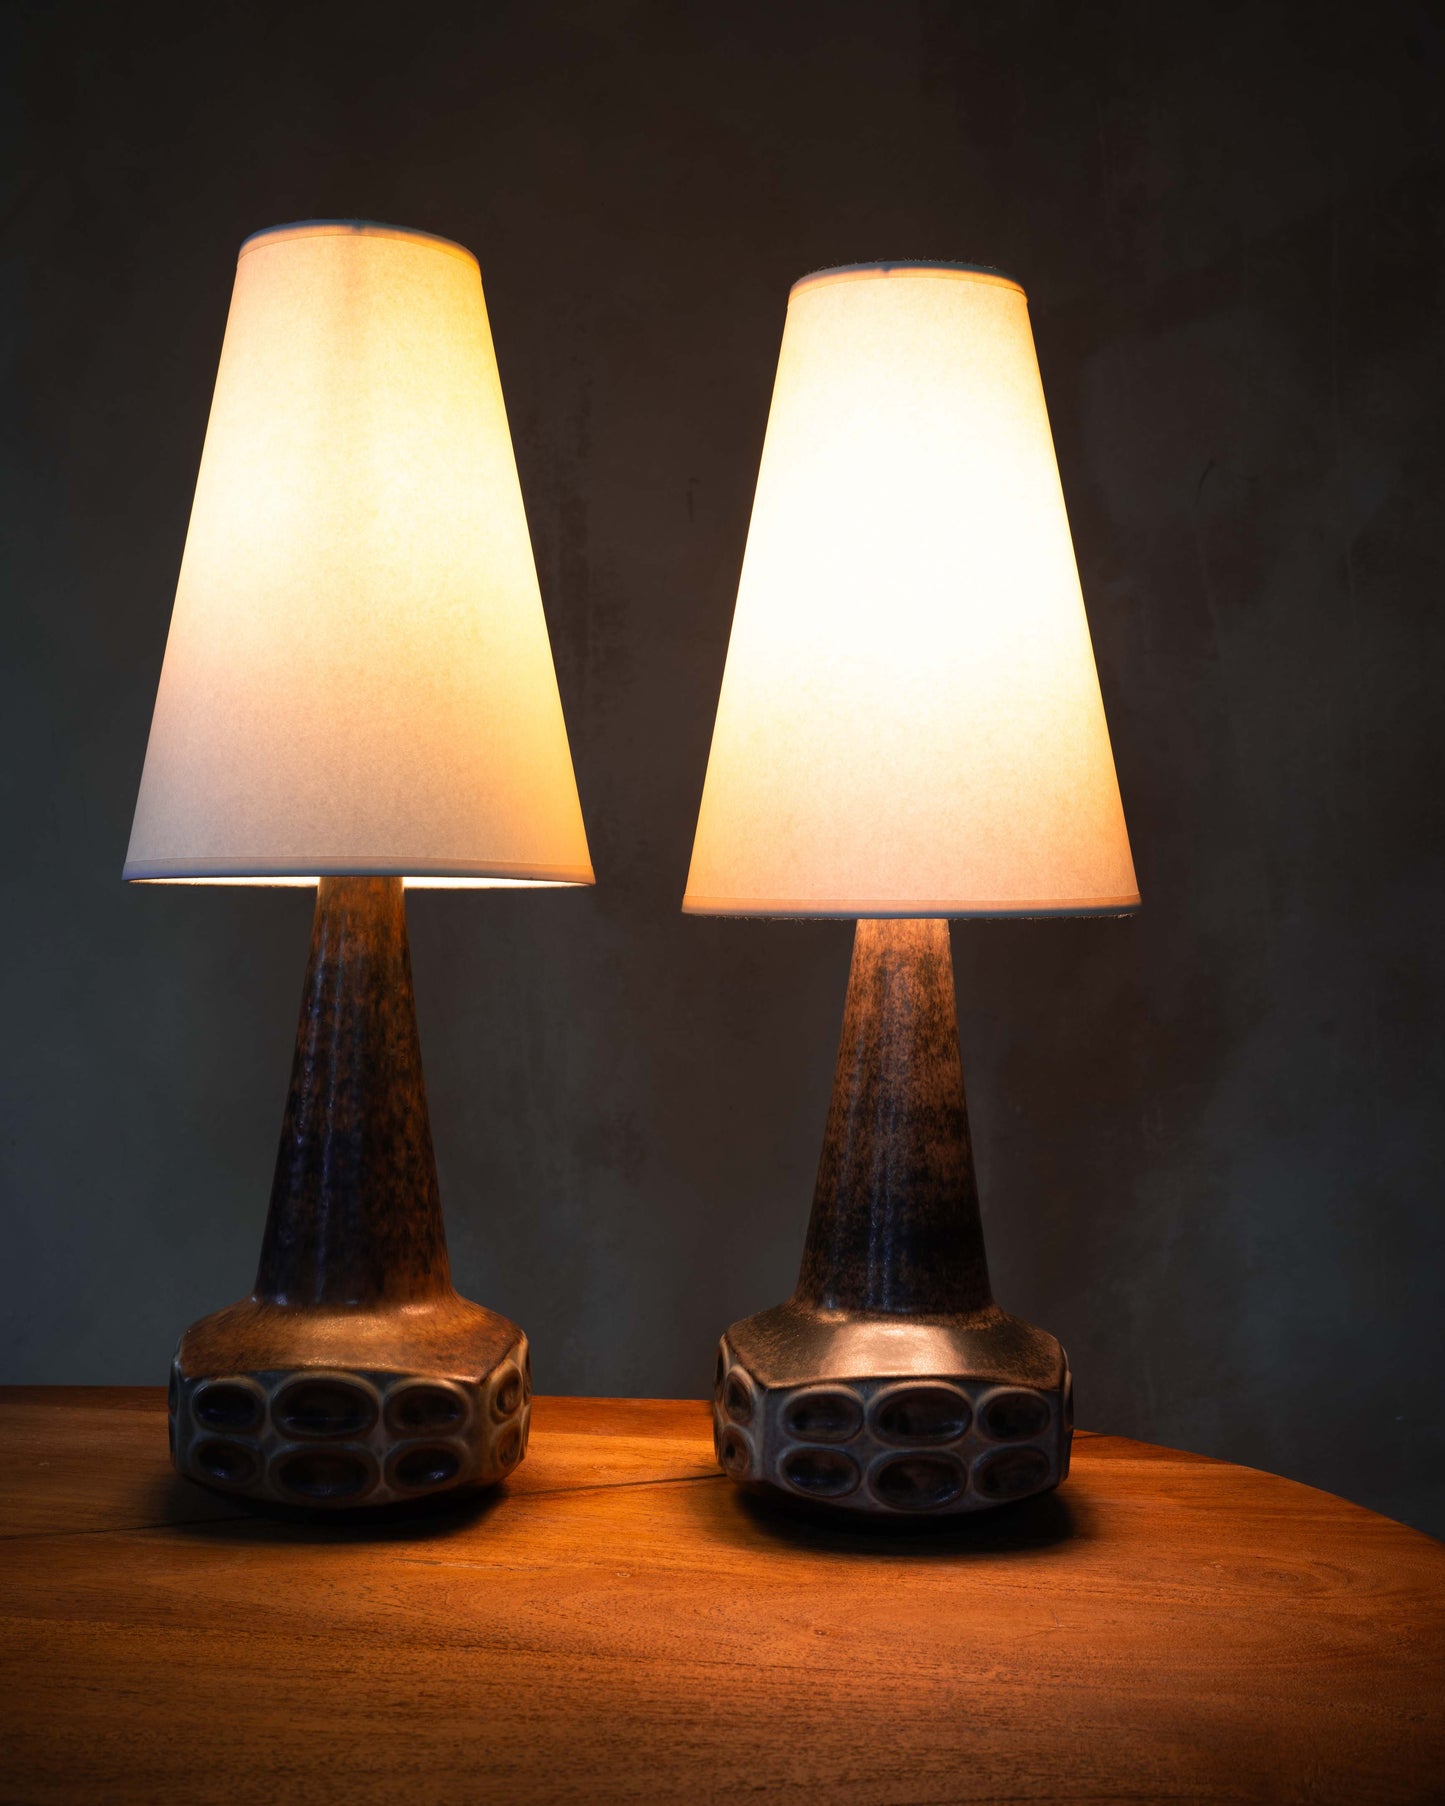 Marianne Starck for Michael Anderson Ceramic Lamps